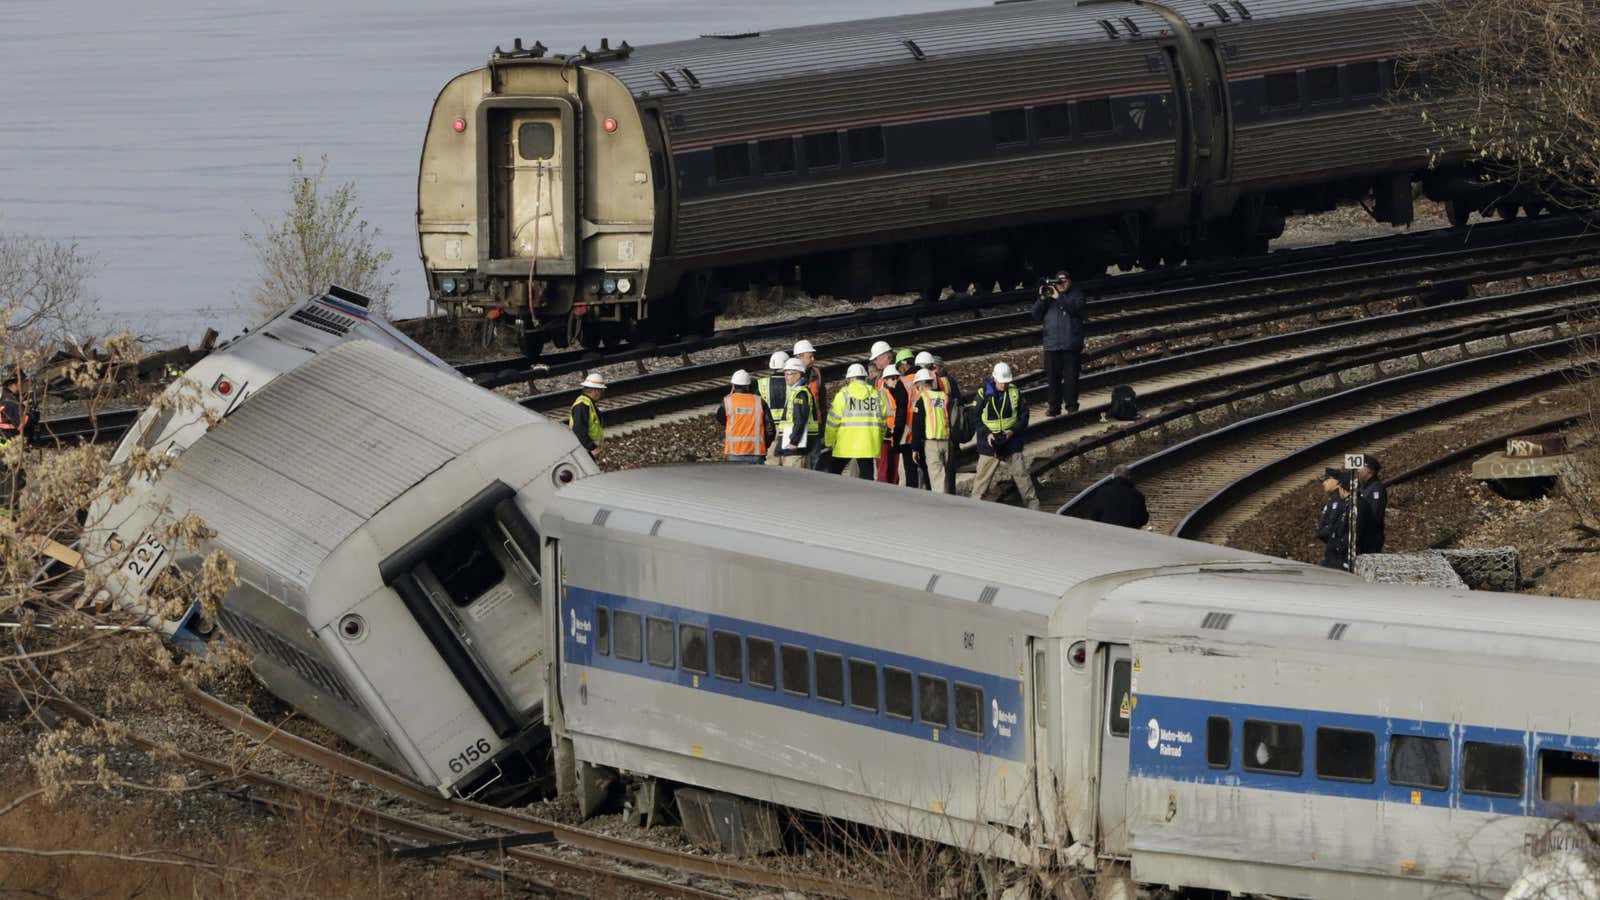 New York governor Andrew Cuomo said the derailment “looked like a toy train set that was mangled by some super-powerful force.”